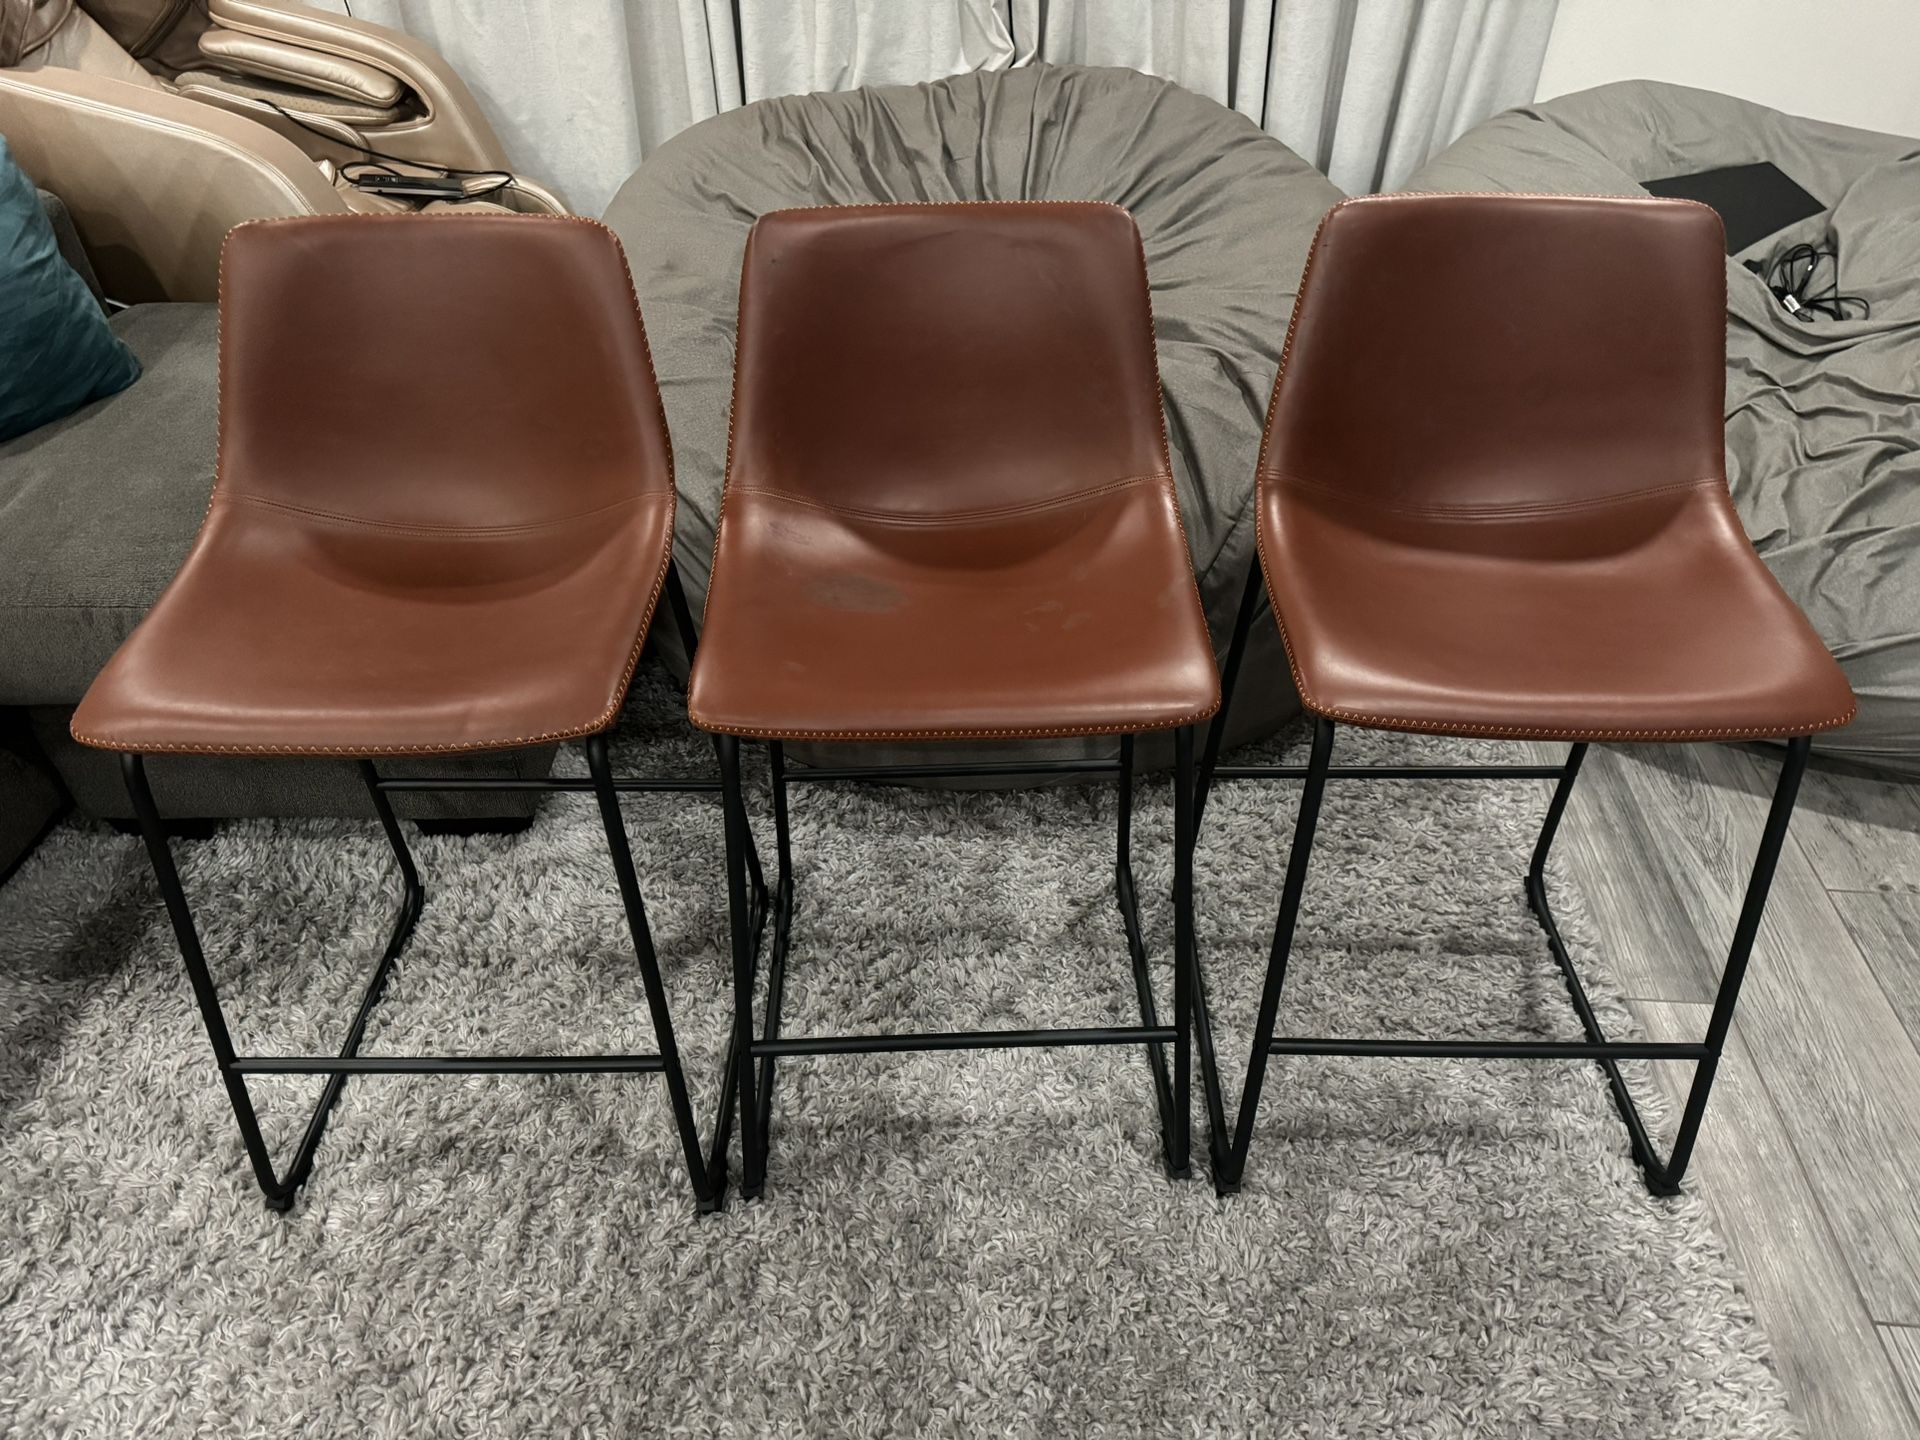 Bar Stools Set Of 3 (25 In)